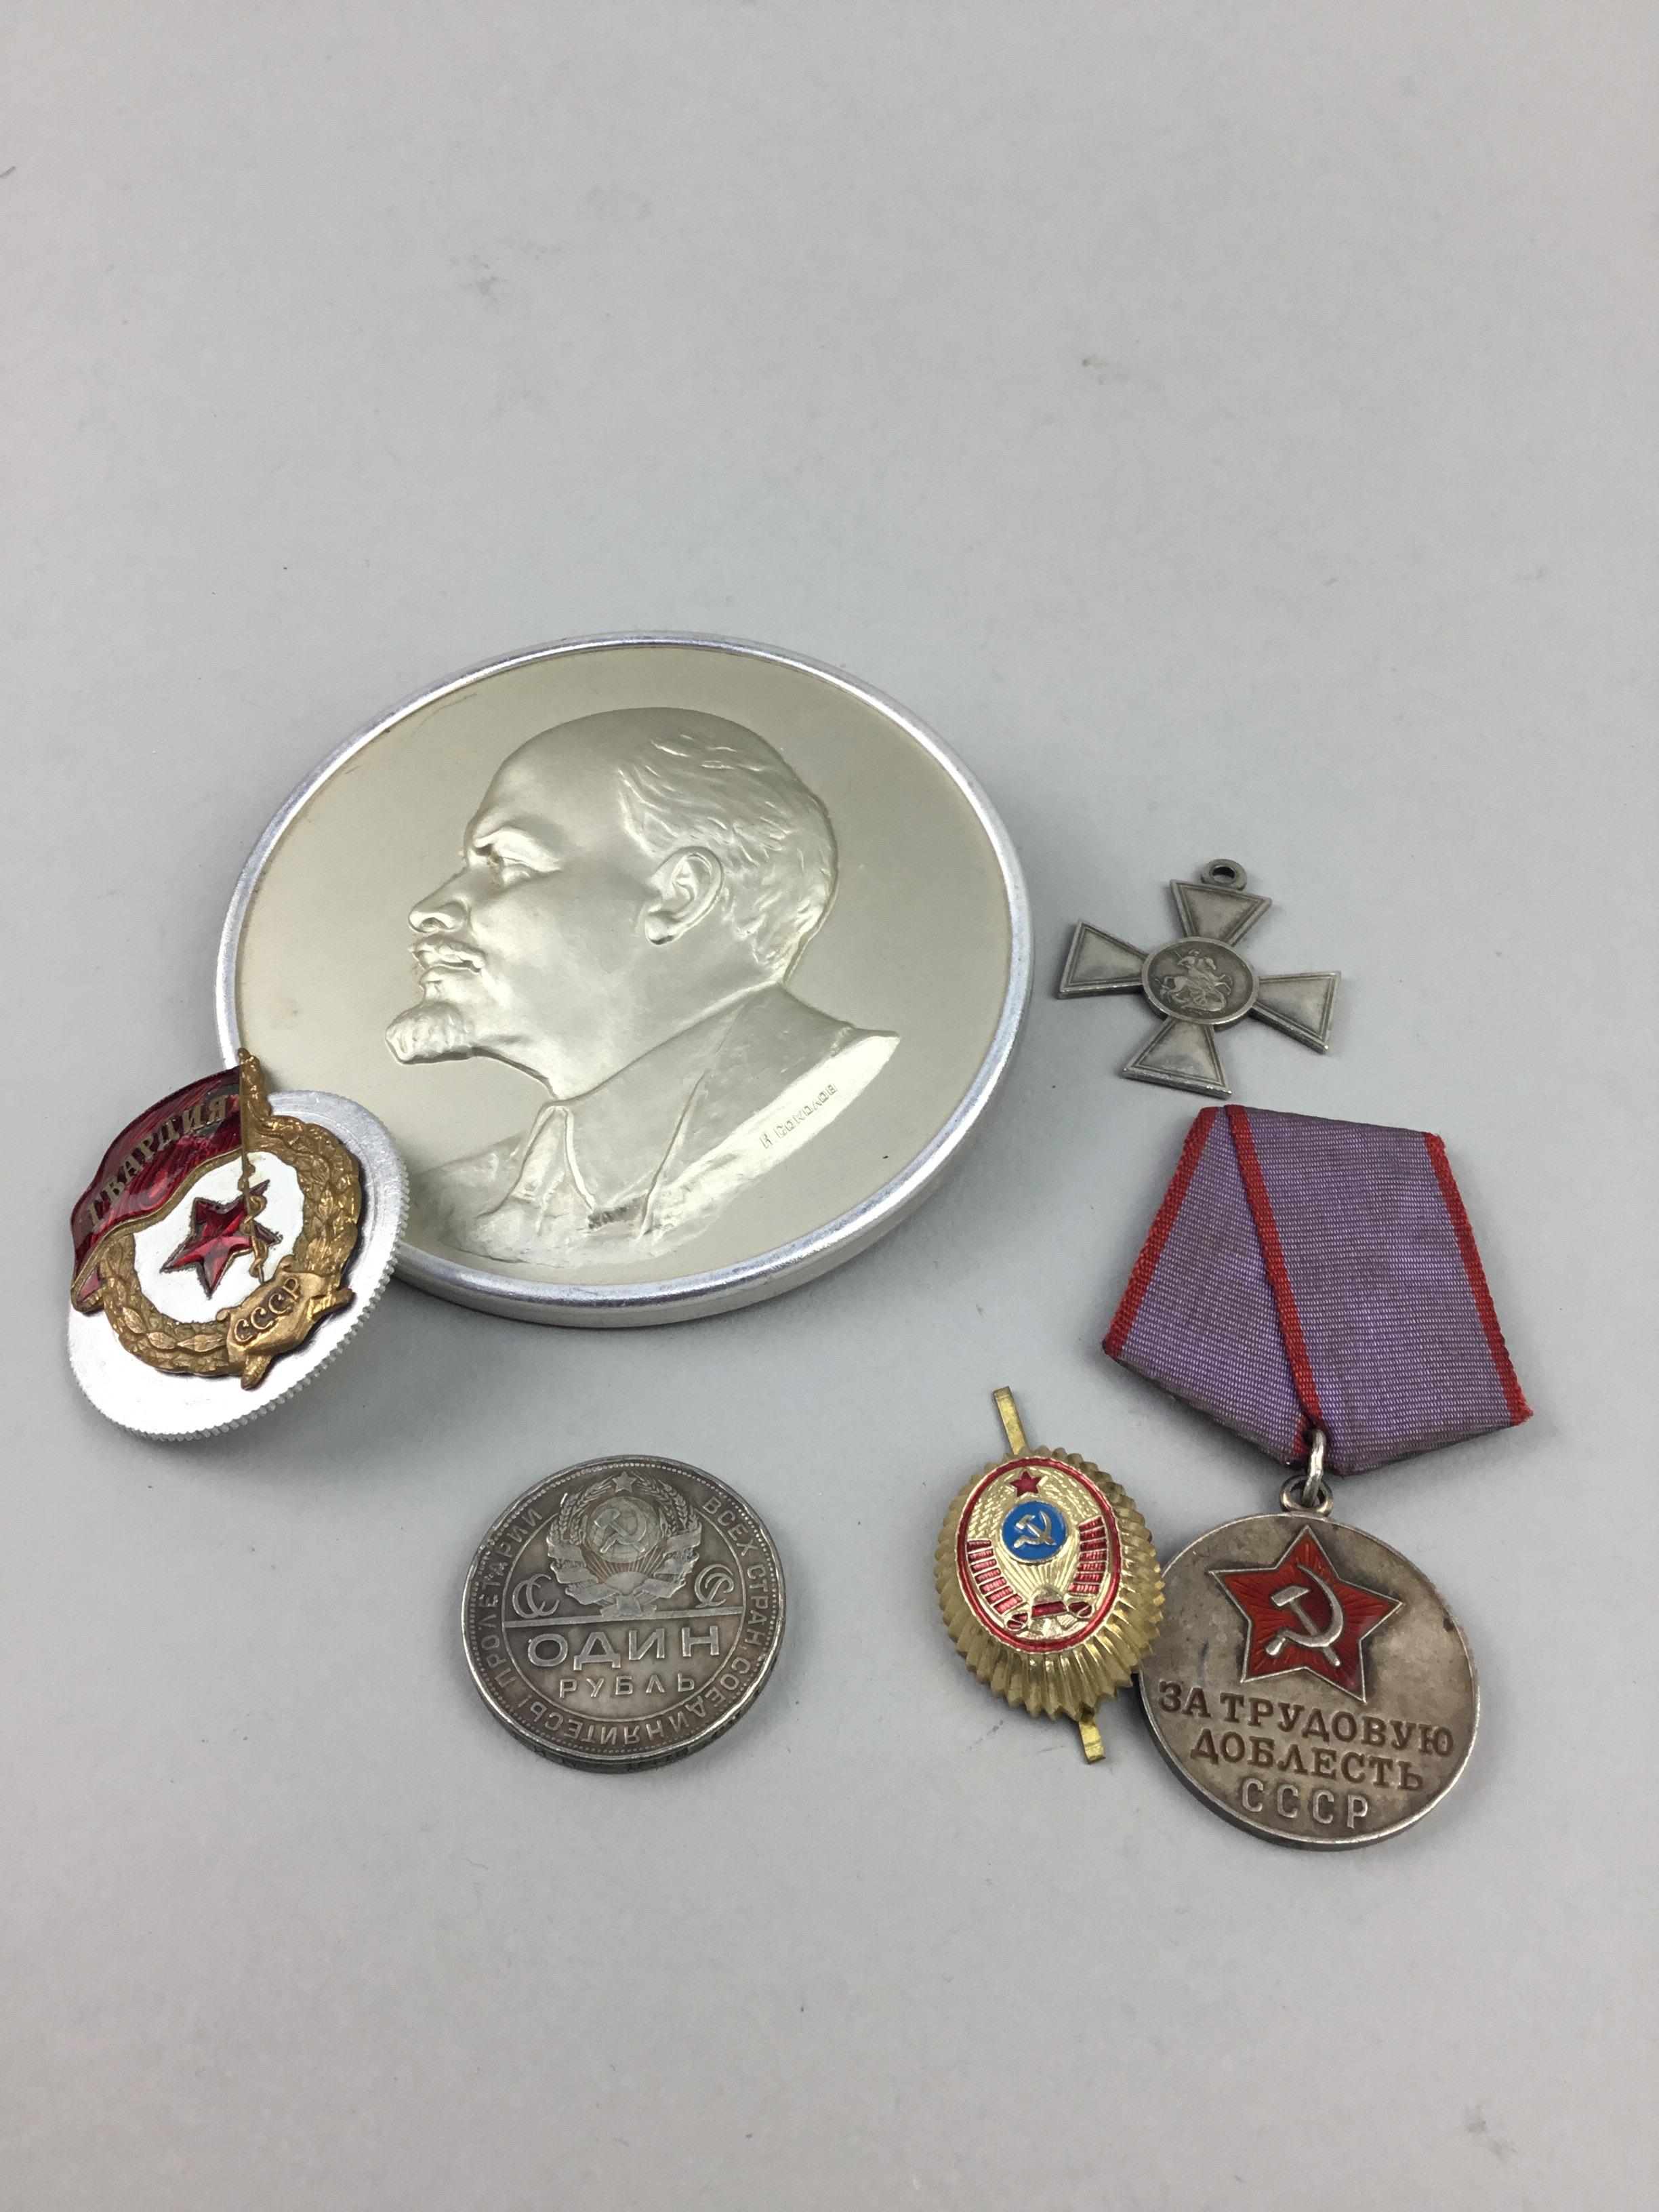 A GROUP OF RUSSIAN MEDALS AND BADGES